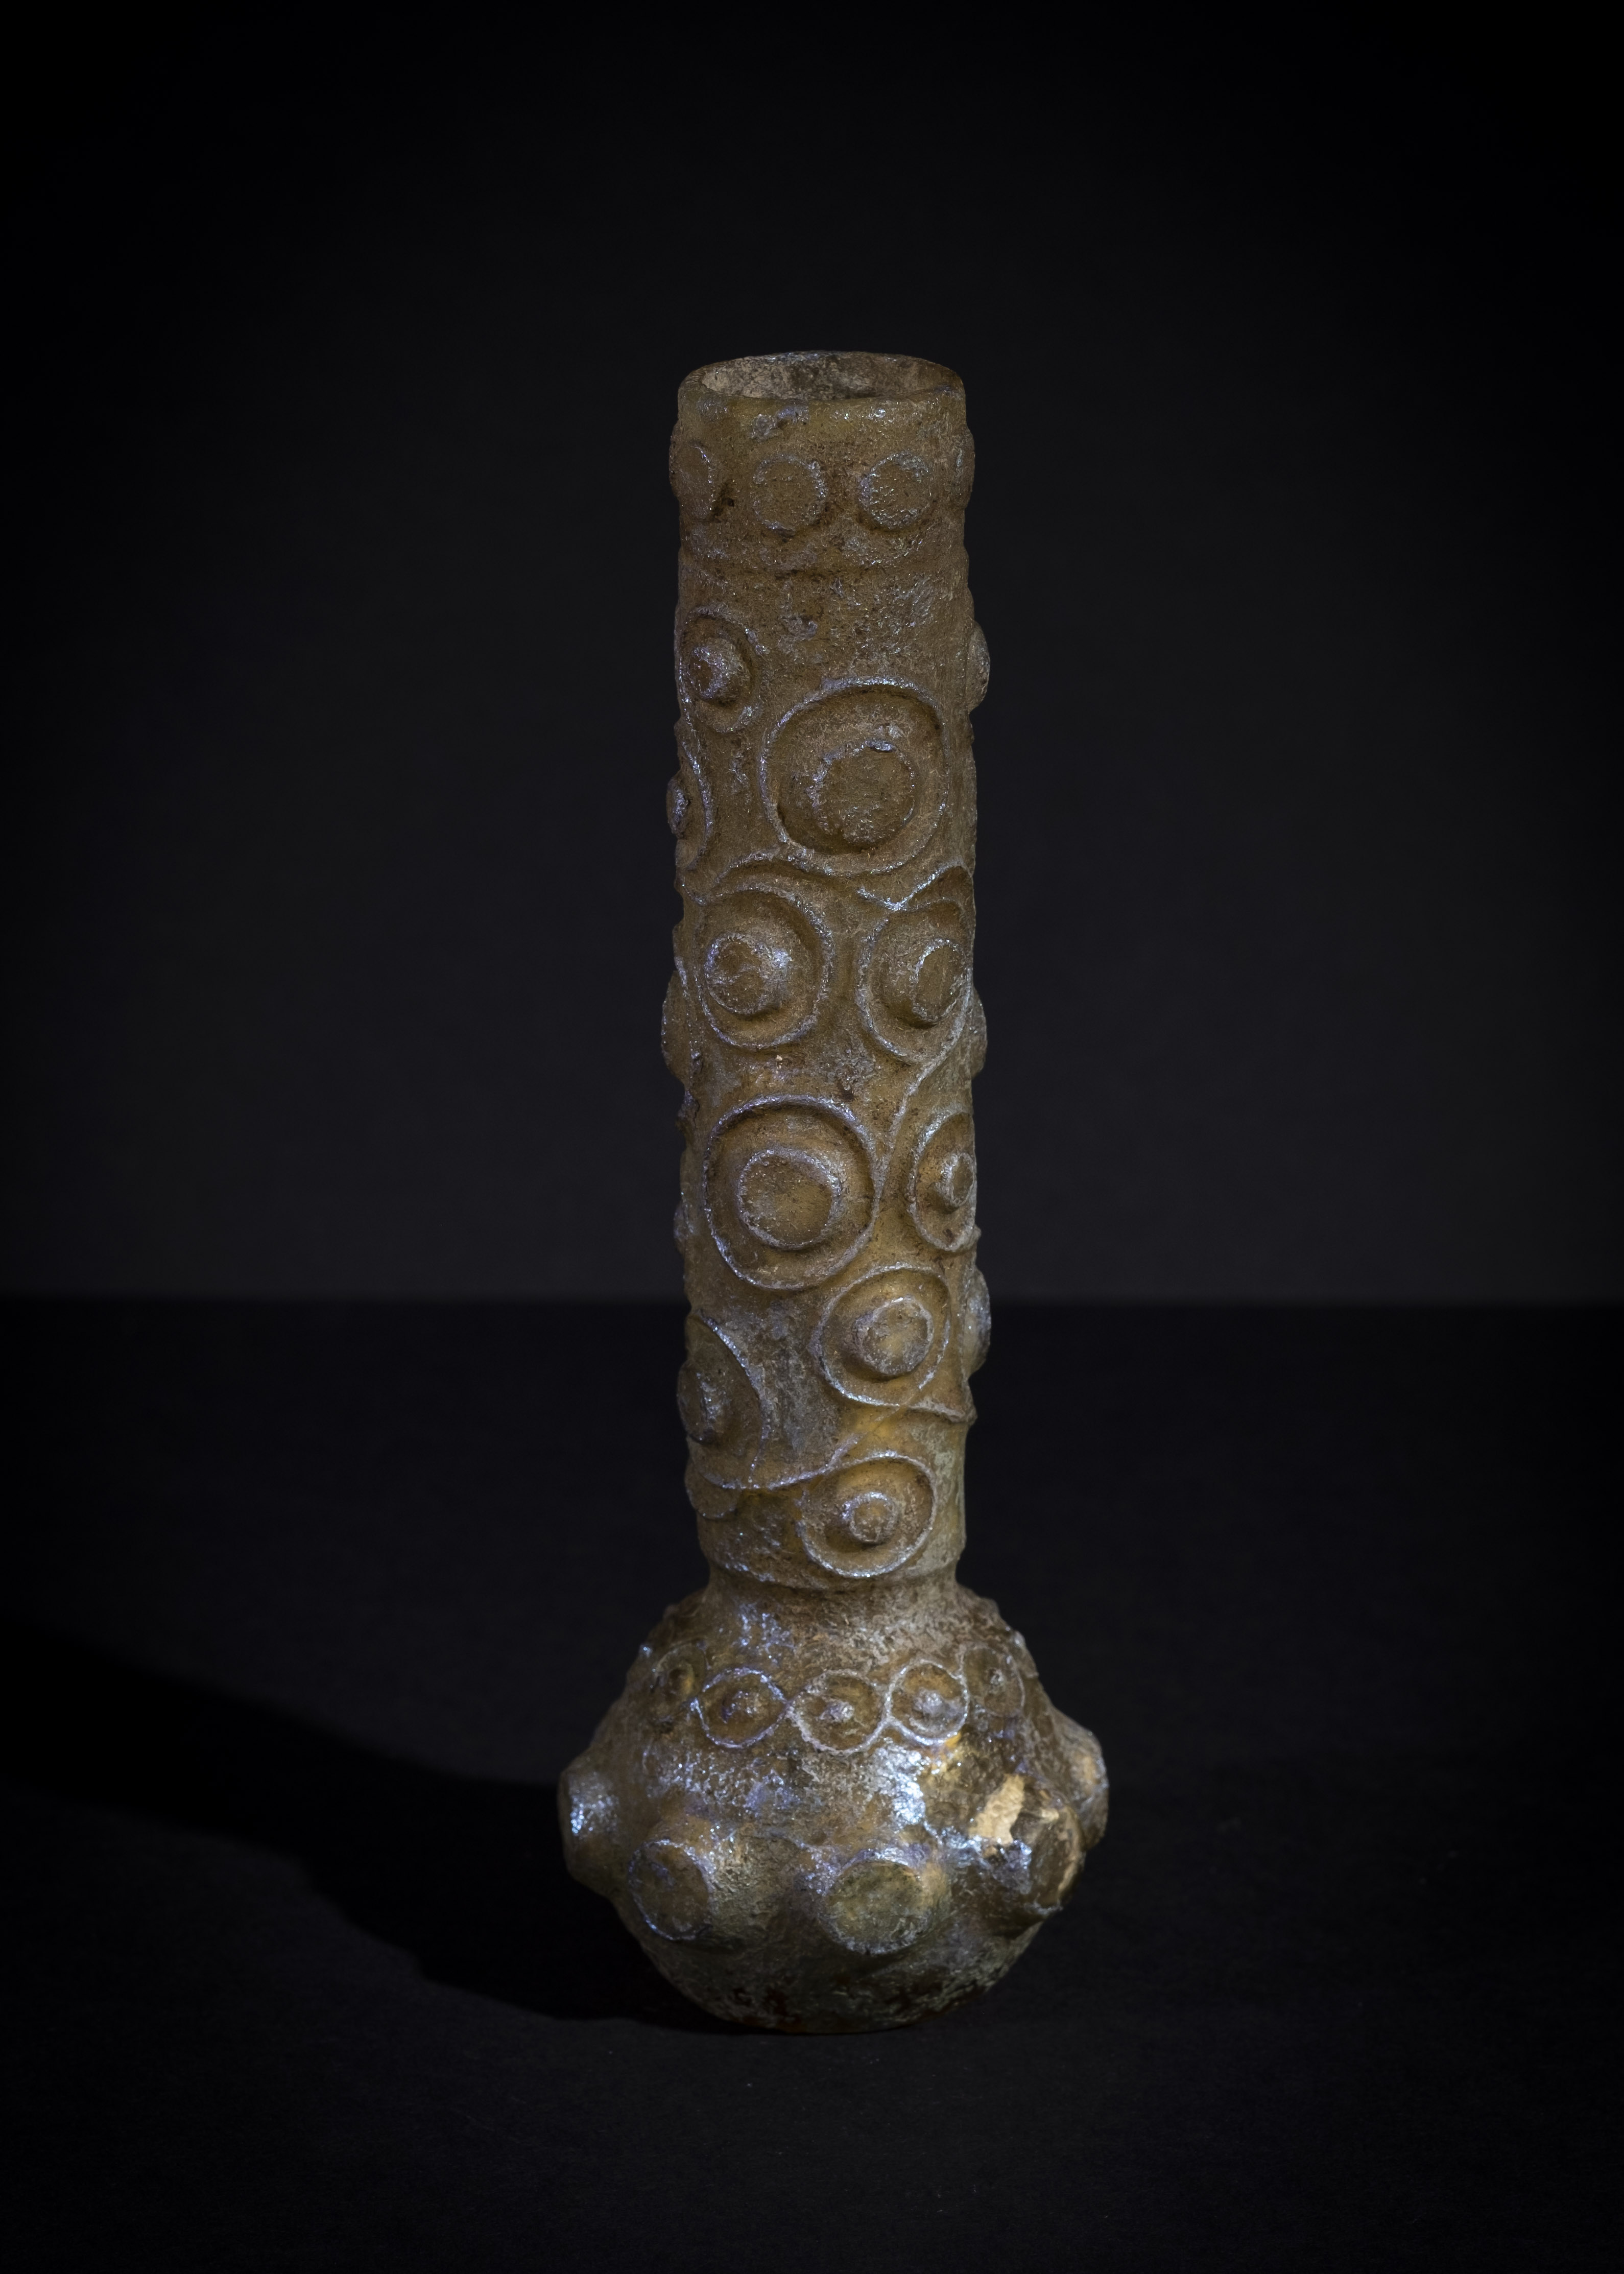 AN ELABORATED ISLAMIC MOULD GLASS BOTTLE